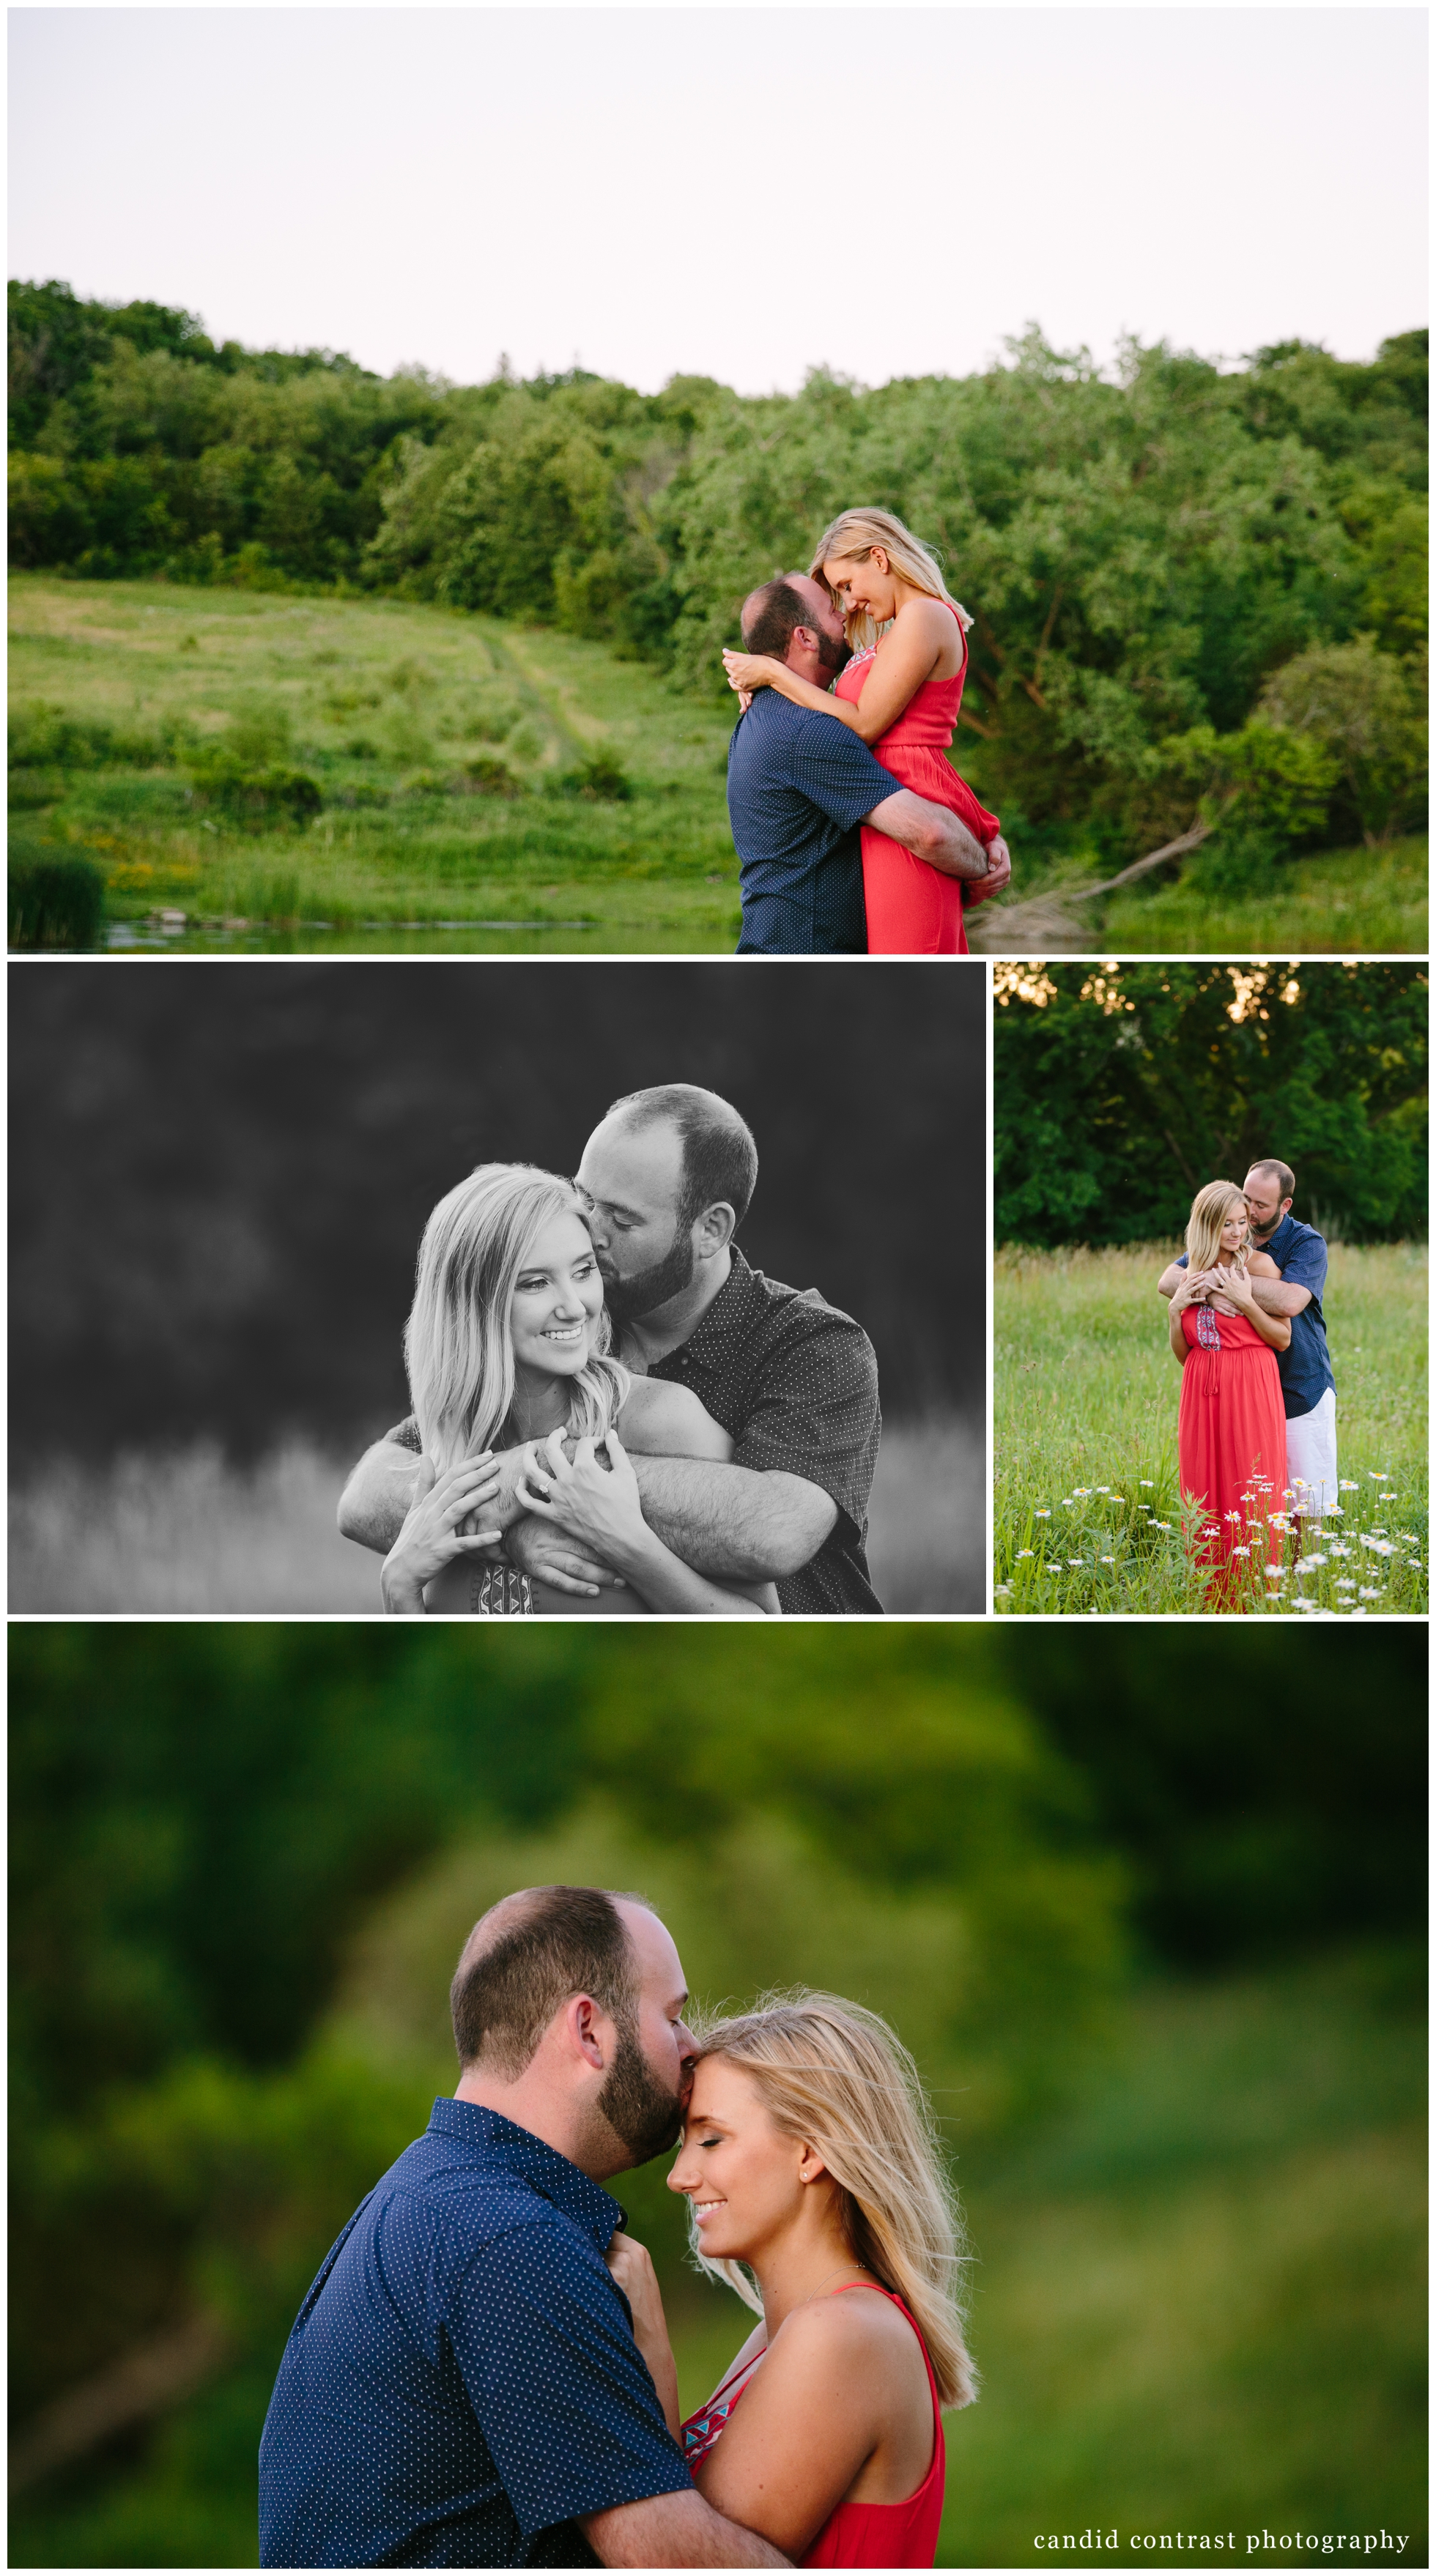 romantic engagement session at lorelei cabins in dubuque iowa, iowa wedding photographer candid contrast photography